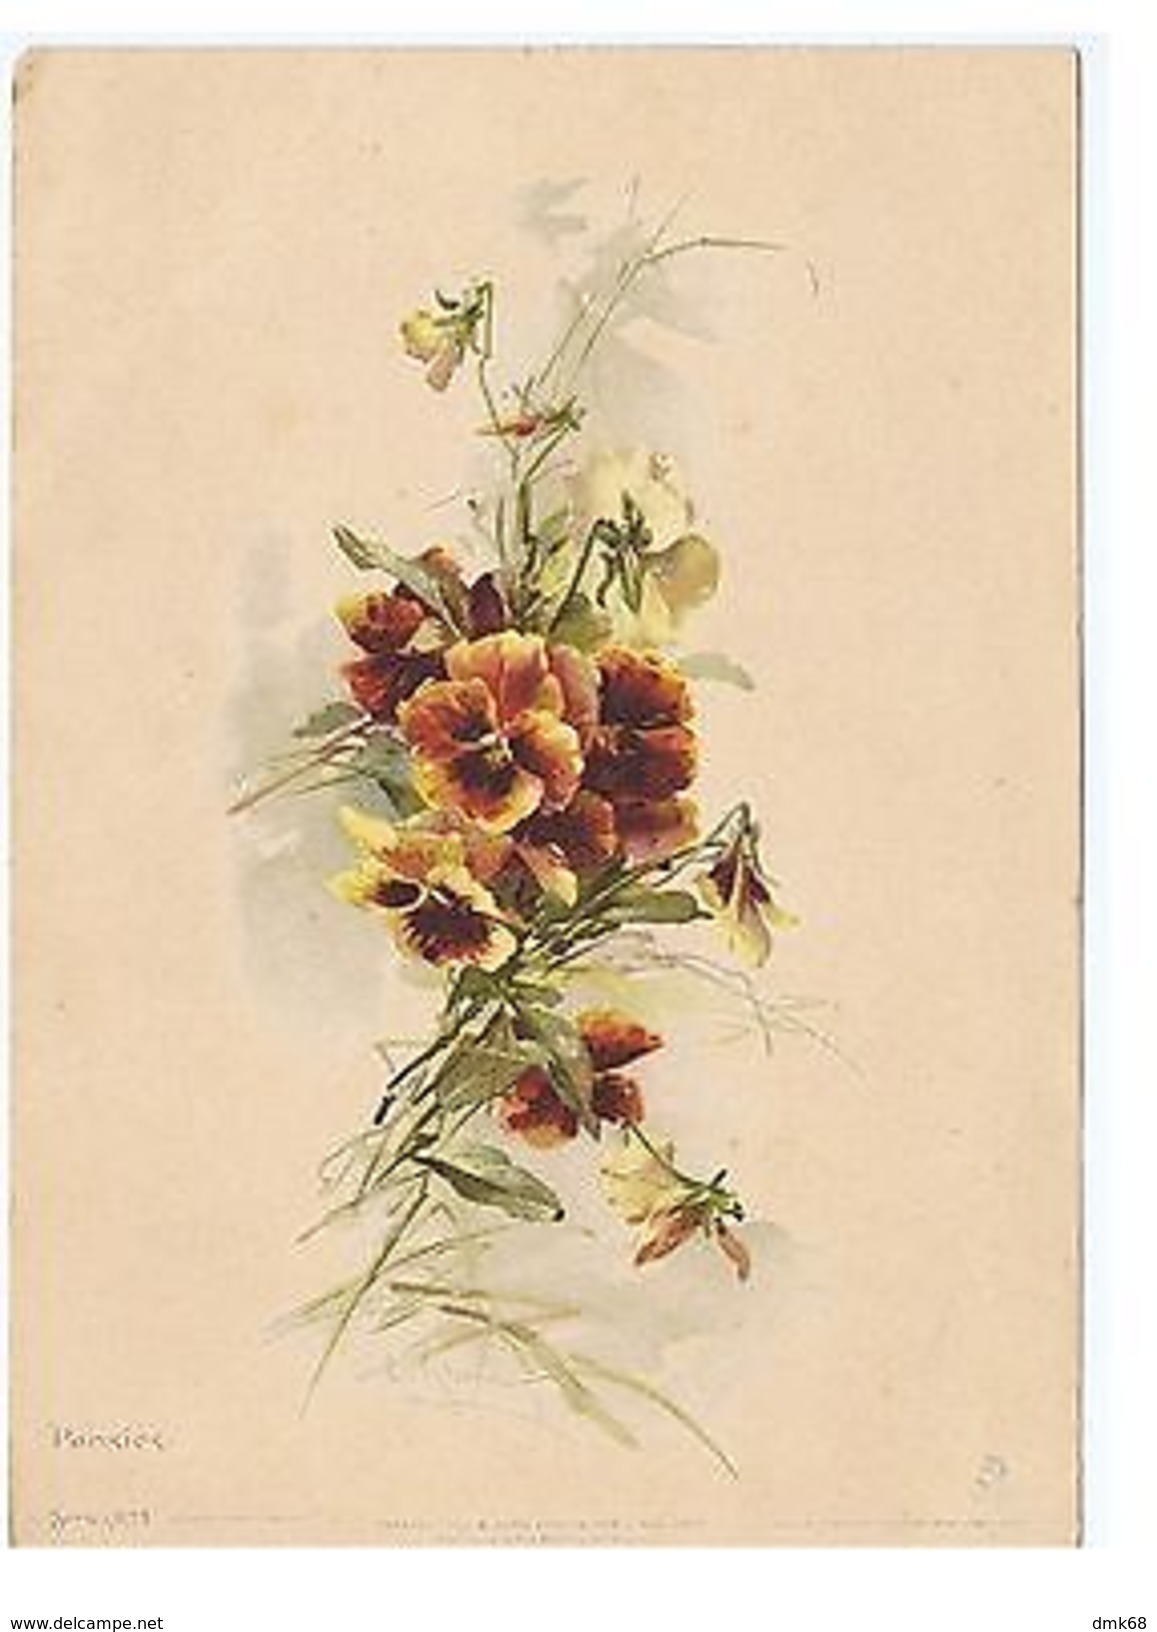 CATHERINE KLEIN - PANSIES - EDIT R. TUCK & SON - LARGE FORMAT - RARE - Unclassified